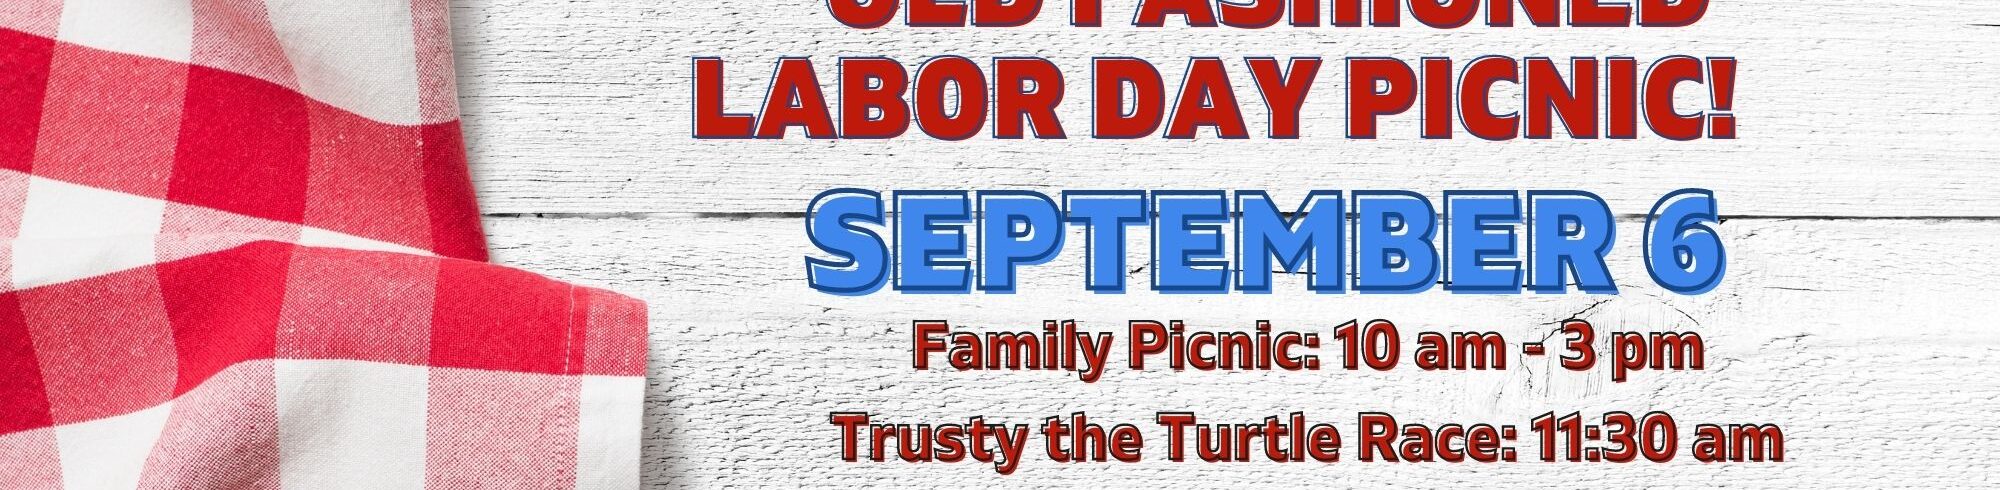 Labor day picnic date and time info